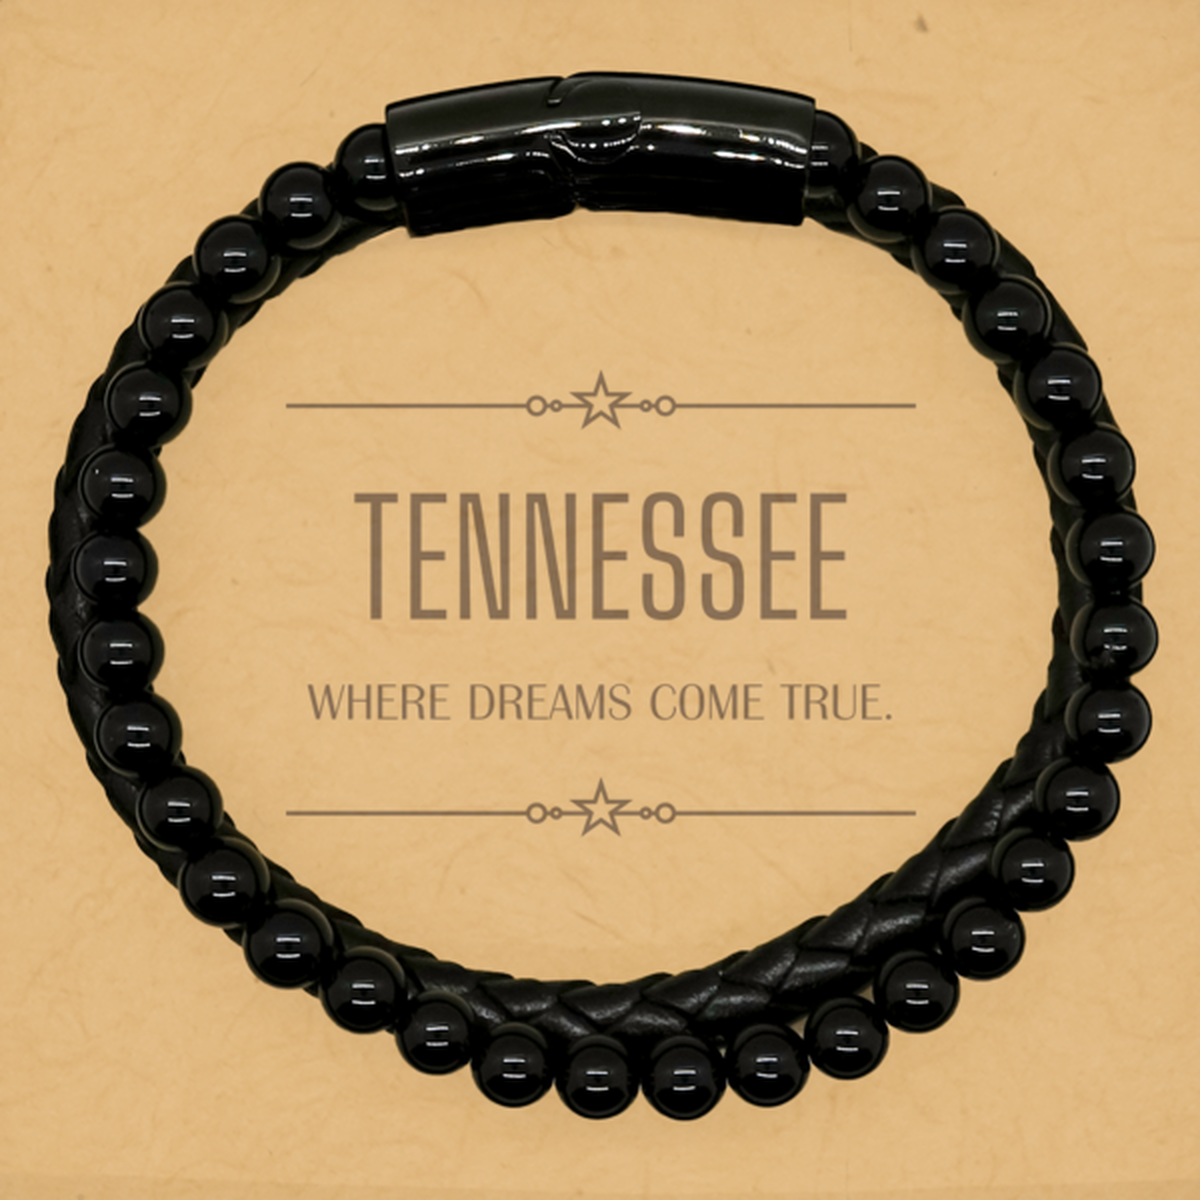 Love Tennessee State Stone Leather Bracelets, Tennessee Where dreams come true, Birthday Inspirational Gifts For Tennessee Men, Women, Friends